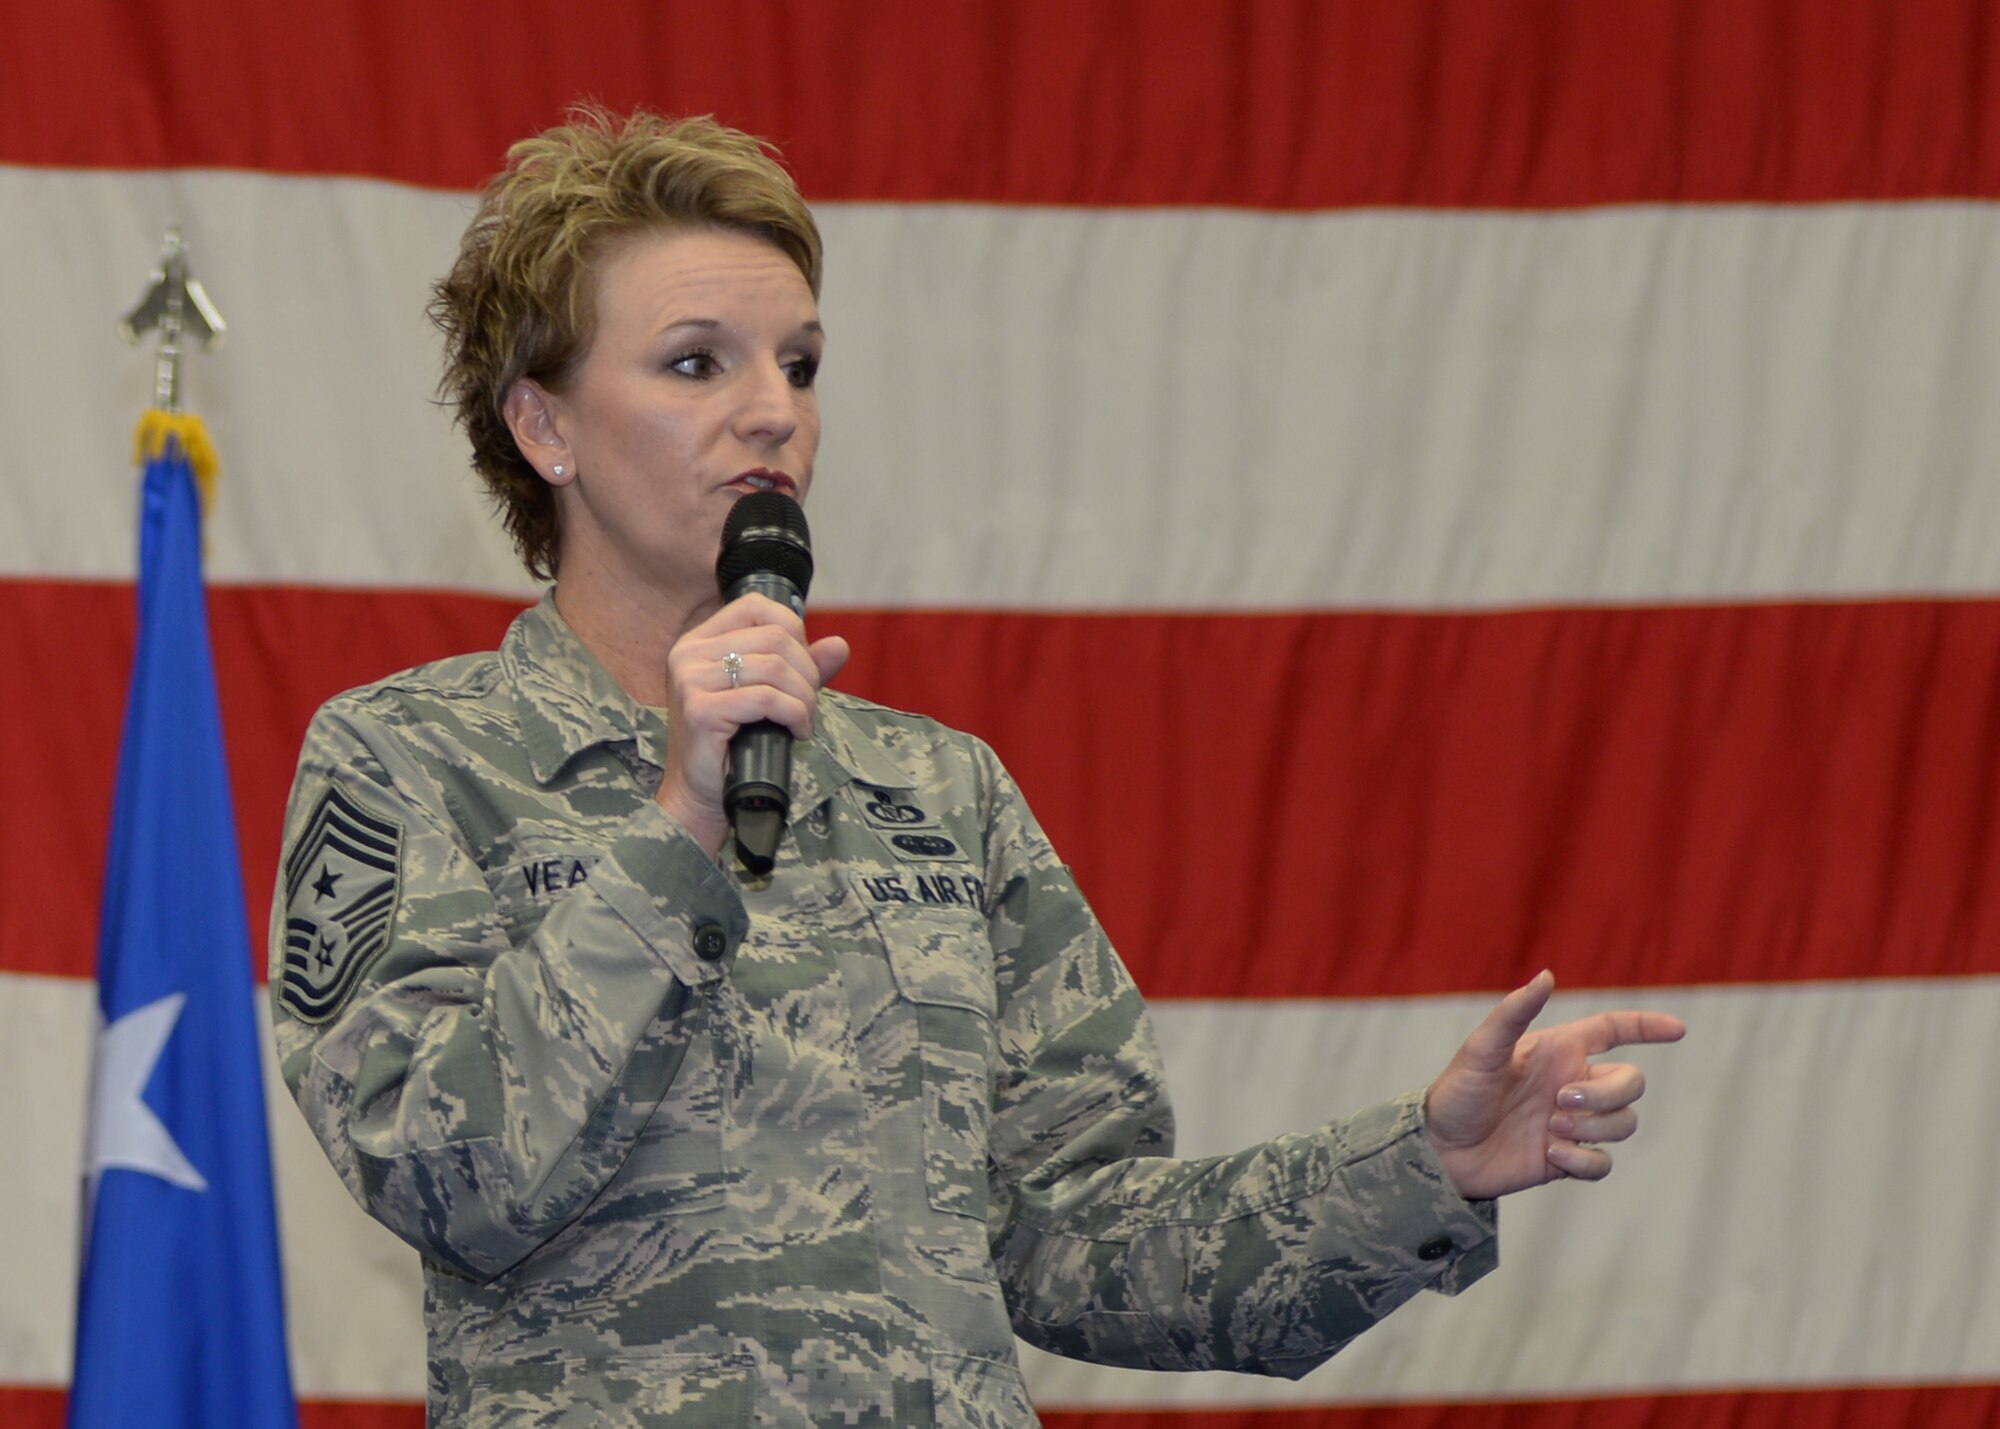 Chief Master Sgt. Gay Veale, 11th Air Force command chief, talks with Airmen during a base wide all call Nov. 24, 2015, at Andersen Air Force, Guam. Veale and 11th Air Force Commander Lt. Gen Russell Handy visited the base to interact with Airmen and leaders from Andersen AFB, Naval Base Guam, and Joint Region Marianas. (U.S. Air Force photo by Senior Airman Cierra Presentado/Released)